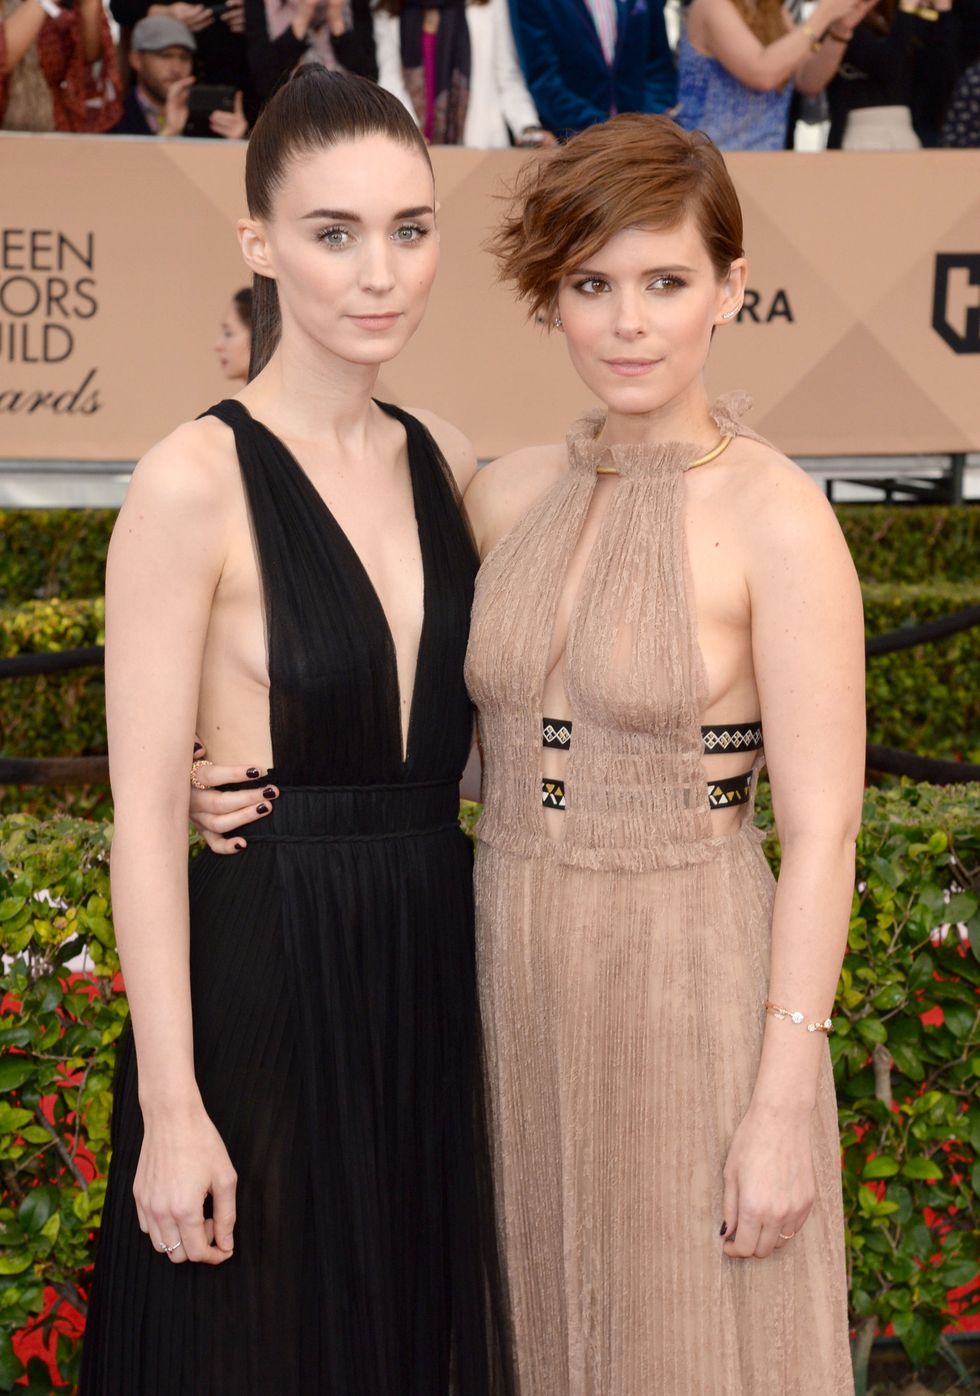 LOS ANGELES, CA - JANUARY 30:  Actresses Rooney Mara and Kate Mara attend the 22nd Annual Screen Actors Guild Awards at The Shrine Auditorium on January 30, 2016 in Los Angeles, California.  (Photo by Jeff Kravitz/FilmMagic)